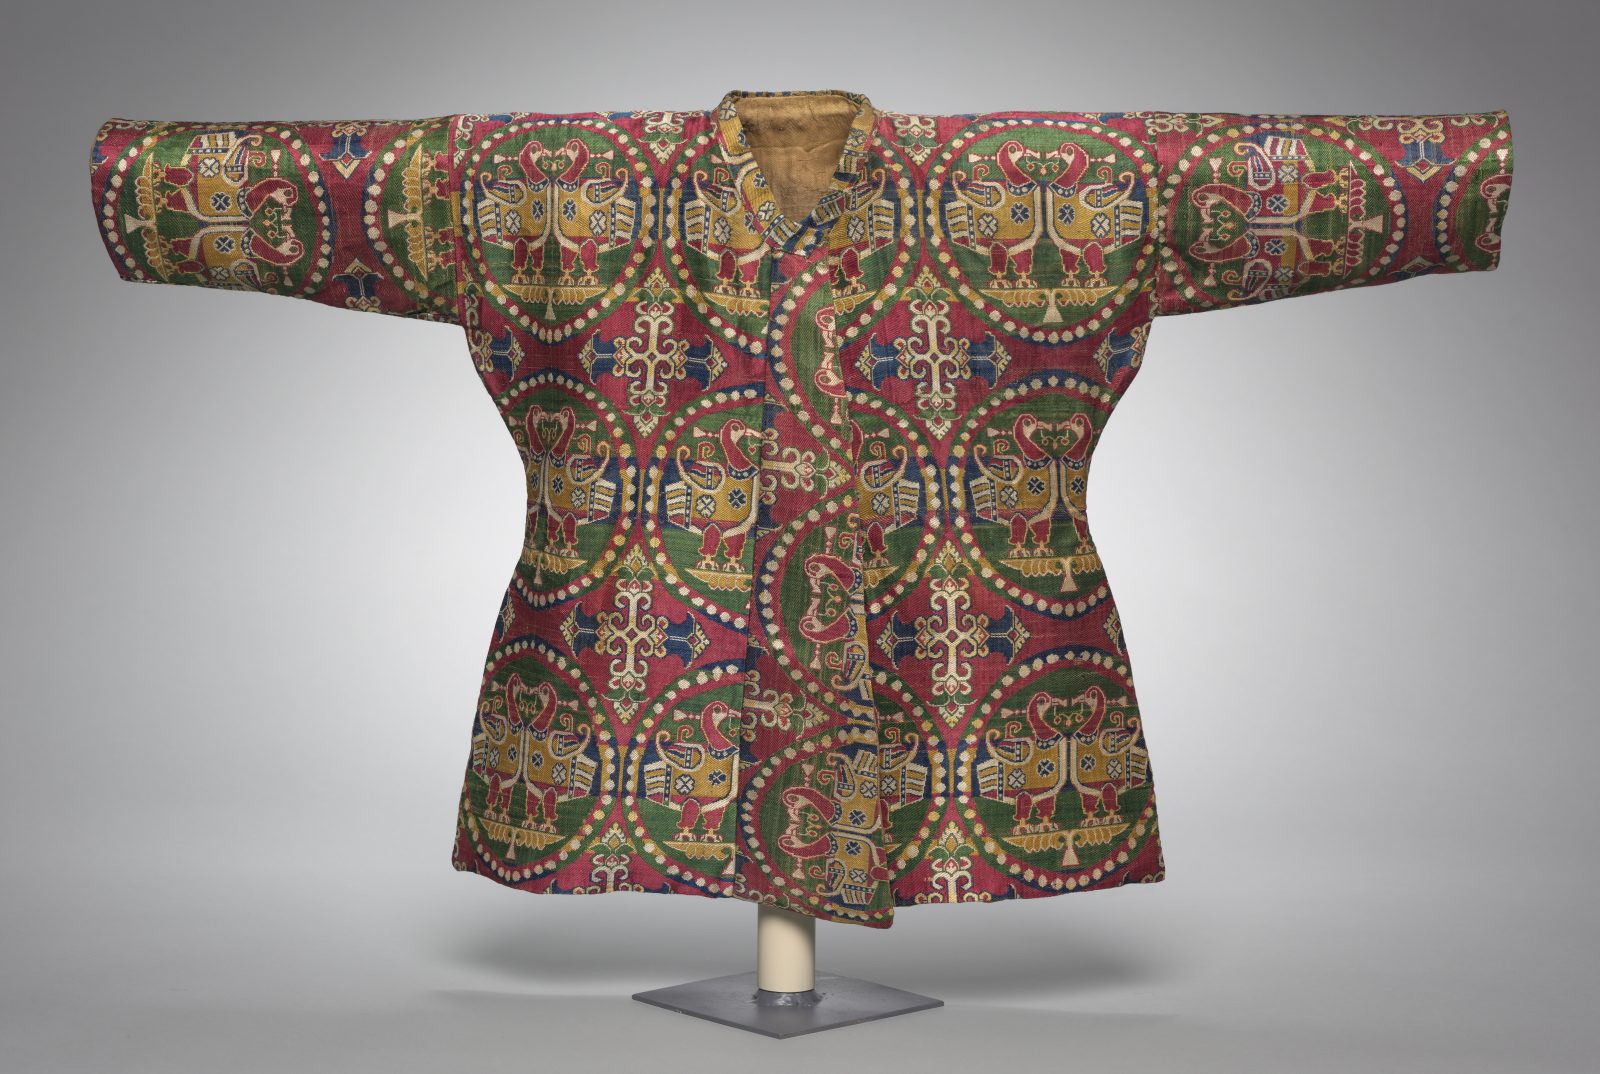 Child’s Coat with Ducks in Pearl Medallions. Uzbekistan (probably Sogdia), 700s. Silk: weft-faced compound twill weave (samite). Width across shoulders: 84.5 cm; length back of neck to hem: 51.4 cm. Silk, weft-faced compound twill weave (samite); W. 84.5 cm (across shoulders), 51.4 cm (length back of neck to hem). The Cleveland Museum of Art, Cleveland, 1996.2.1. Photograph © The Cleveland Museum of Art., Cleveland, Ohio, Purchase from the J. H. Wade Fund 1996.2.1.